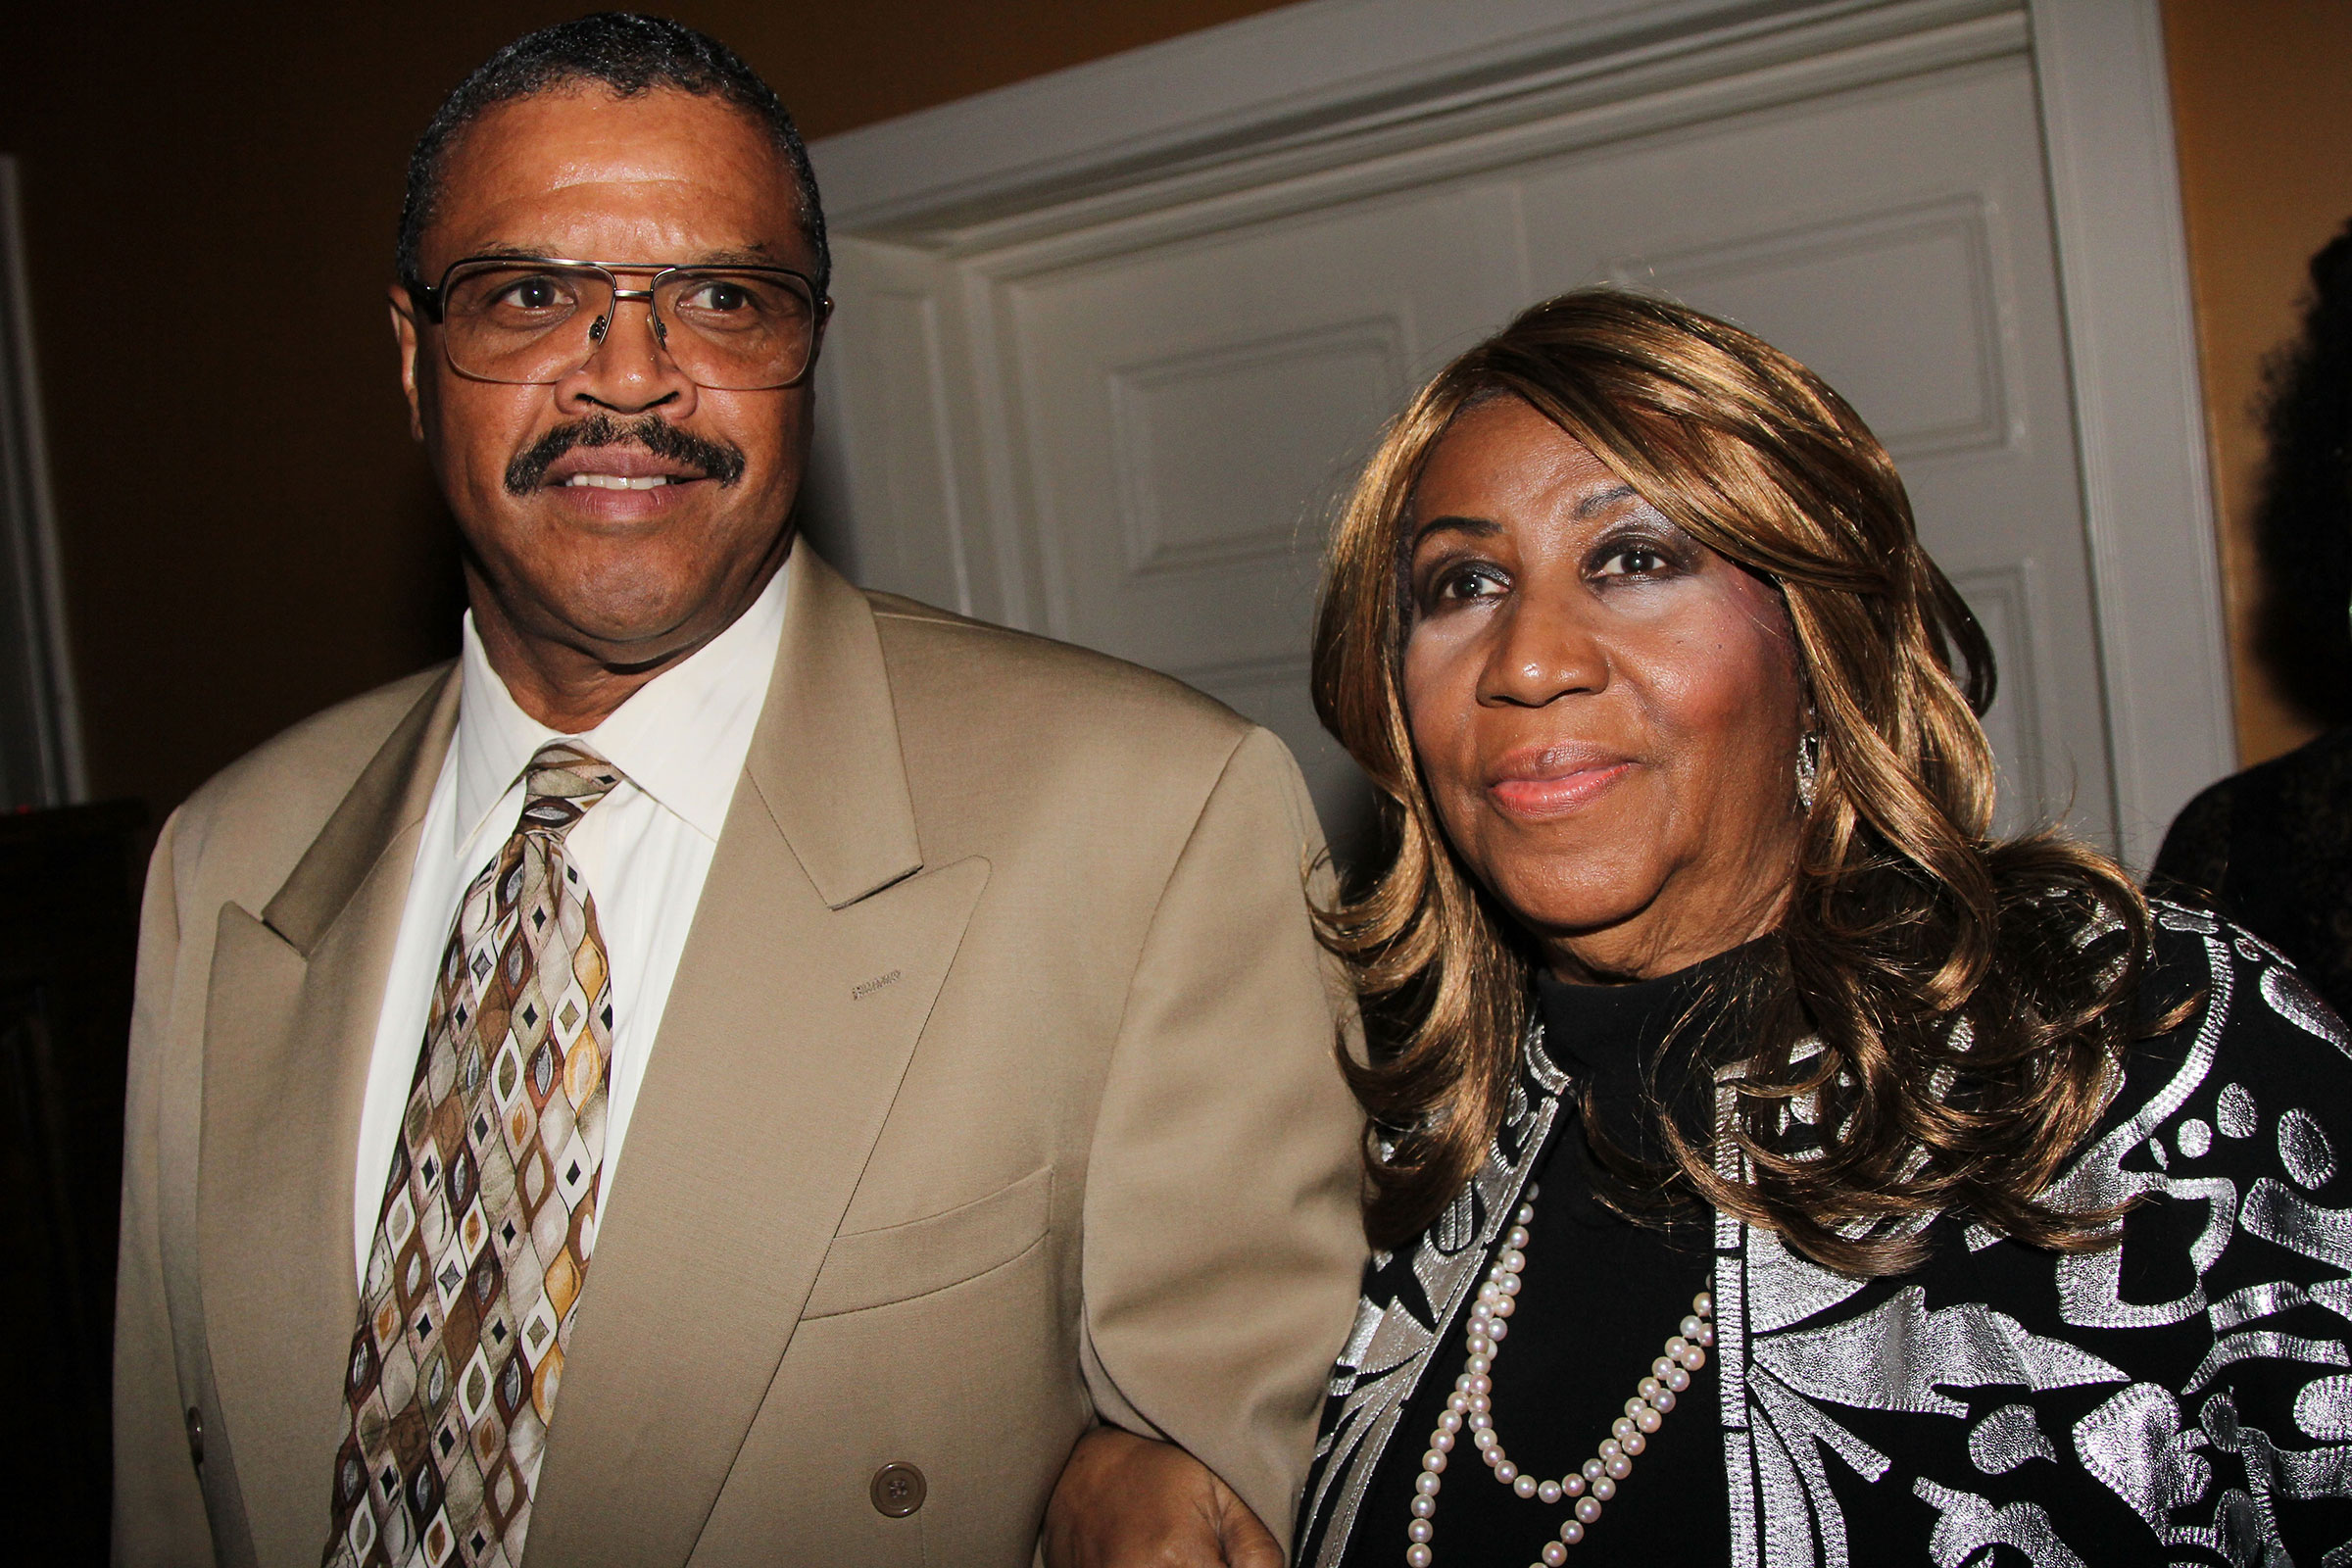 Willie Wilkerson and Aretha Franklin in New York City in September 2012. (Bruce Glikas—FilmMagic/Getty Images)